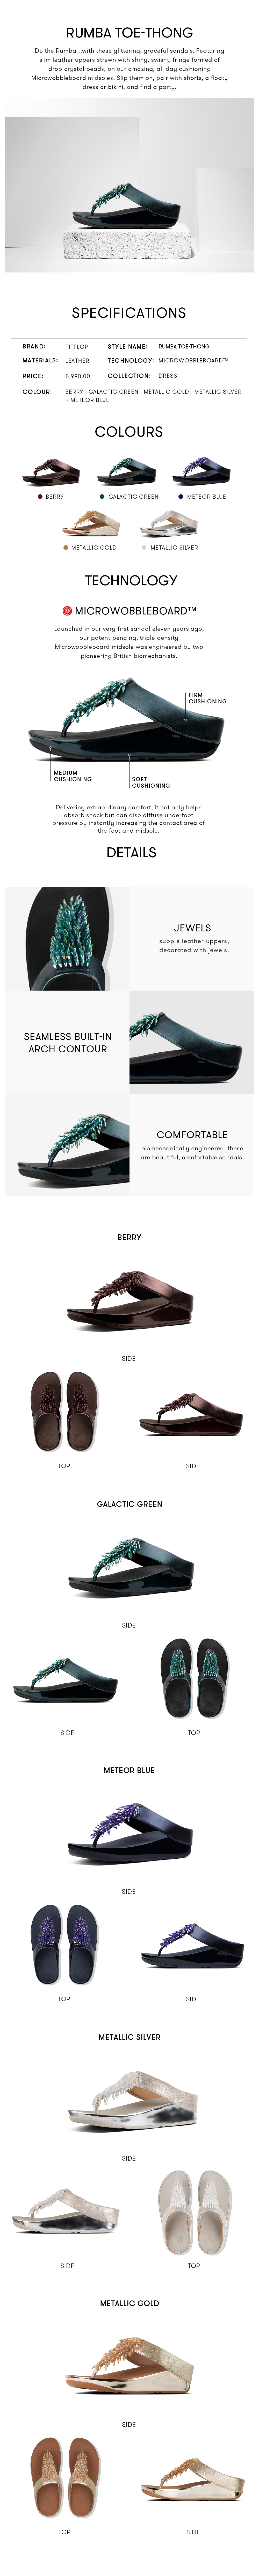 fitflop rumba berry